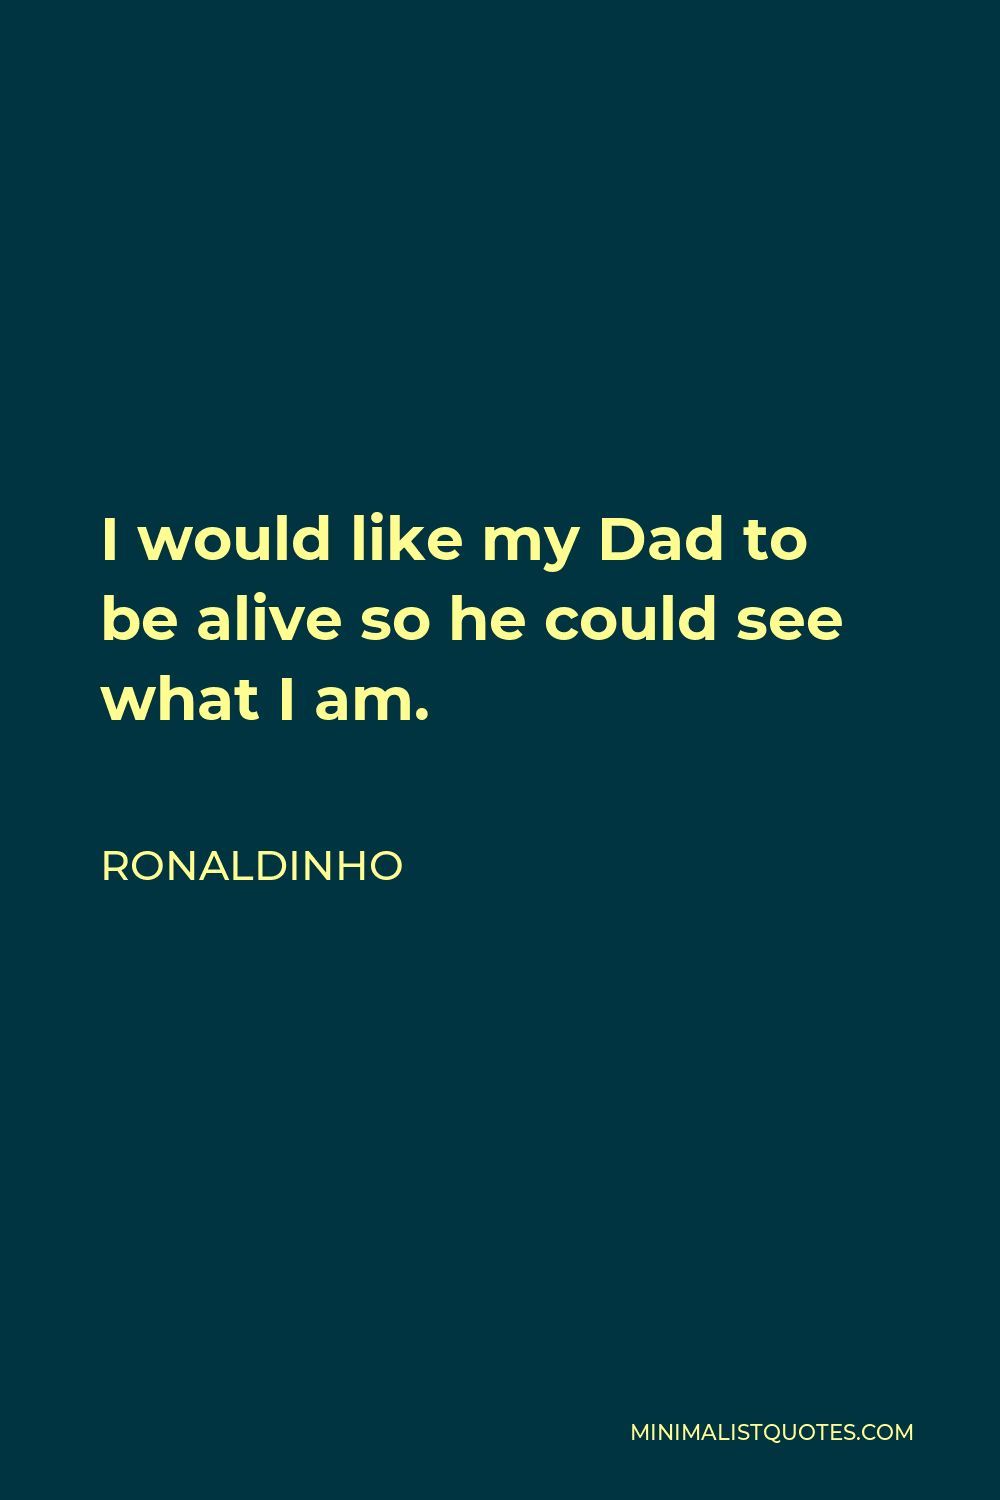 Ronaldinho Quote - I would like my Dad to be alive so he could see what I am.